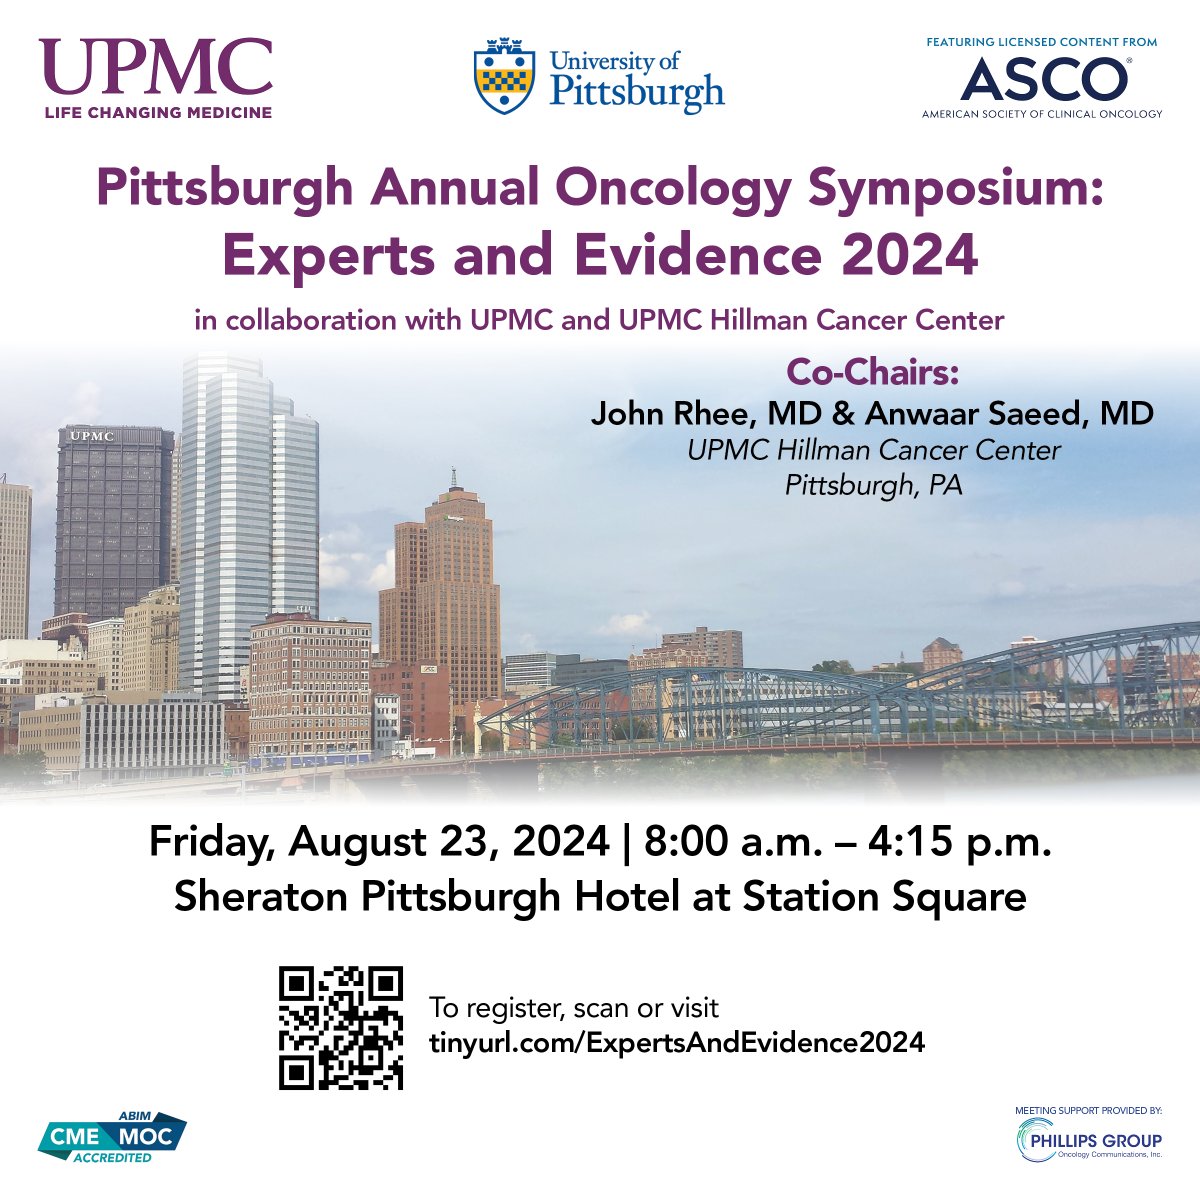 Stephen V. Liu: Pittsburgh Annual Oncology Symposium Experts and Evidence 2024